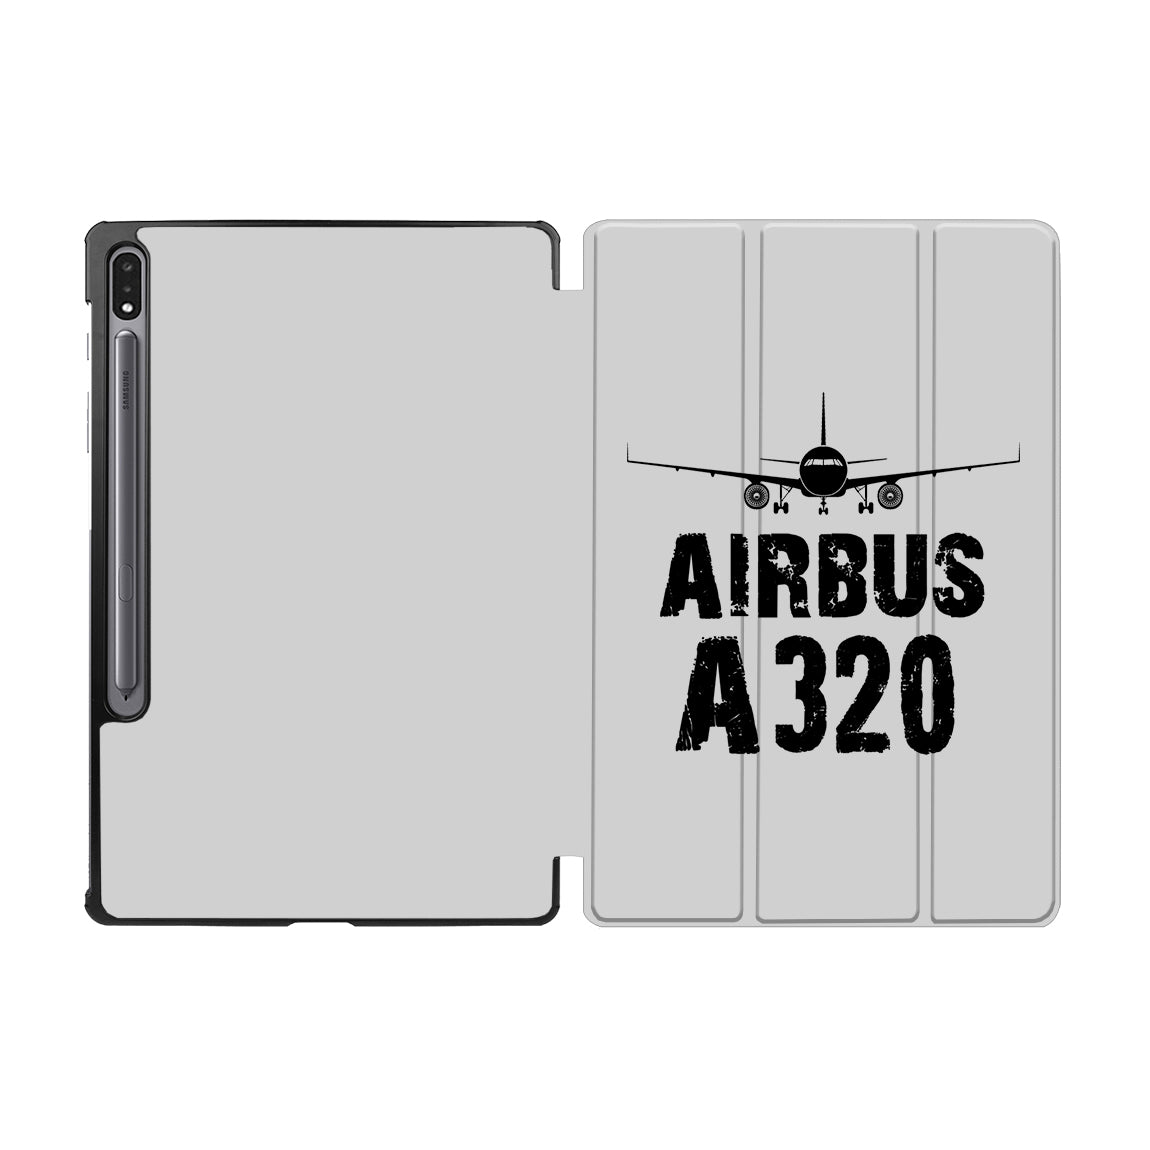 Airbus A320 & Plane Designed Samsung Tablet Cases